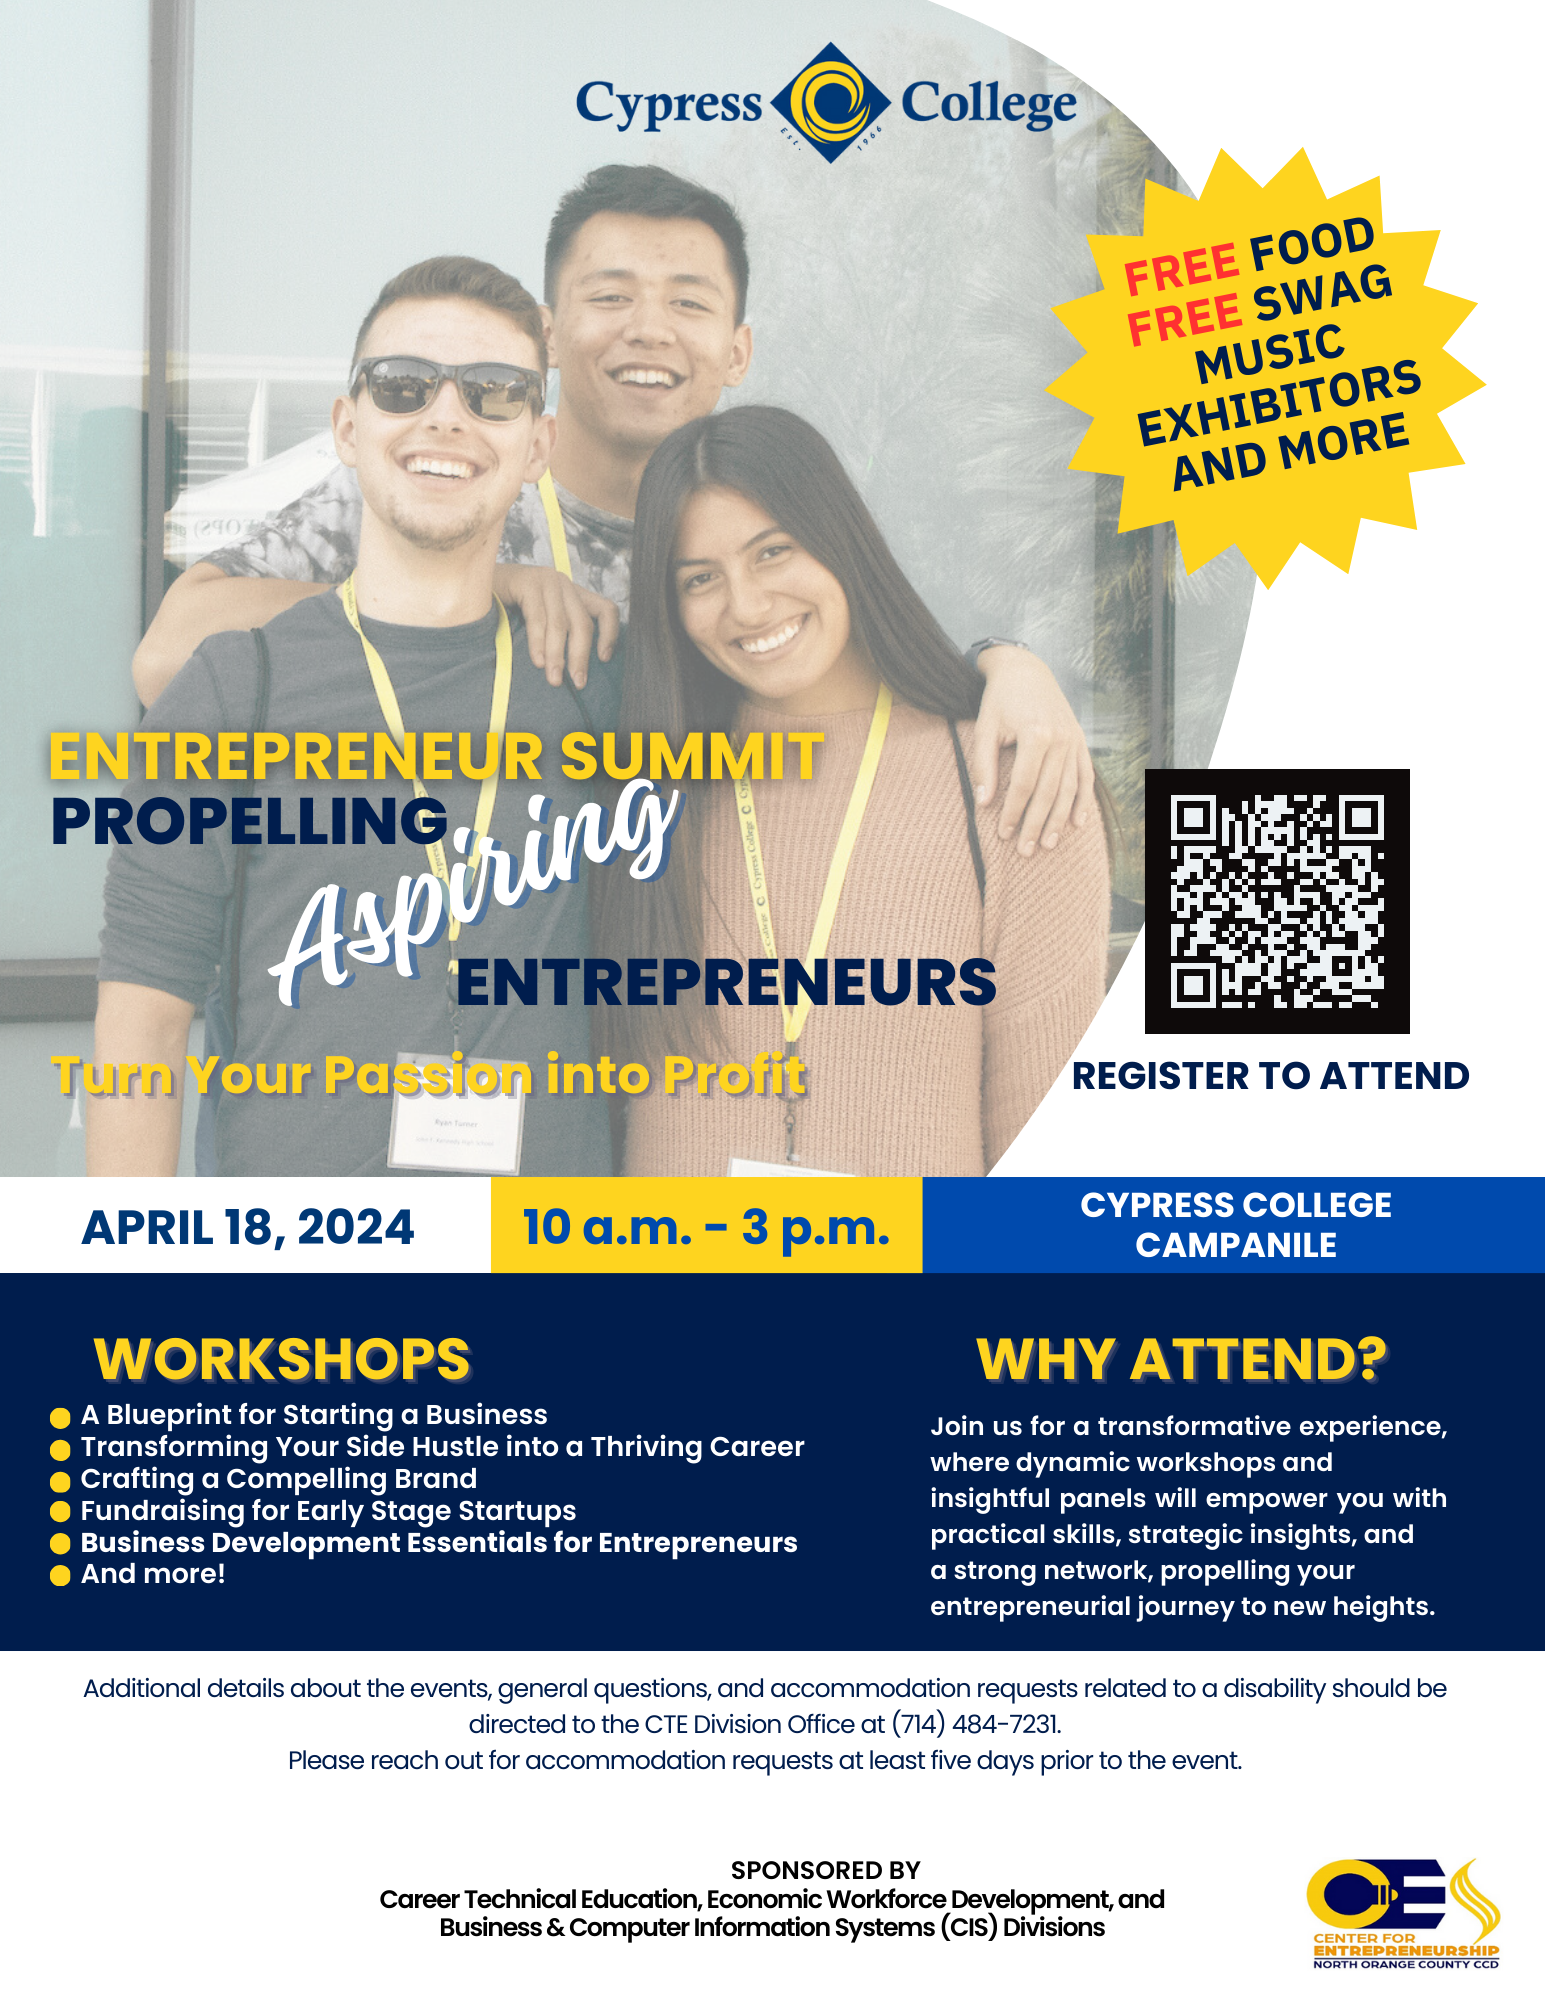 FREE FOOD FREE SWAG MUSIC EXHIBITORS AND MORE ENTREPRENEUR SUMMIT PROPELLING Aspiting ENTREPRENEURS Turs Your Passion into Profit REGISTER TO ATTEND APRIL 18, 2024 10 a.m. - 3 p.m. CYPRESS COLLEGE CAMPANILE WORKSHOPS A Blueprint for Starting a Business Transforming Your Side Hustle into a Thriving Career Crafting a Compelling Brand Fundraising for Early Stage Startups Business Development Essentials for Entrepreneurs And more! WHY ATTEND? Join us for a transformative experience, where dynamic workshops and insightful panels will empower you with practical skills, strategic insights, and a strong network, propelling your entrepreneurial journey to new heights. Additional details about the events, general questions, and accommodation requests related to a disability should be directed to the TE Division Office at (714) 484-7231. Please reach out for accommodation requests at least five days prior to the event. SPONSORED BY Career Technical Education, Economic Workforce Development, and Business & Computer Information Systems (CIS) Divisions